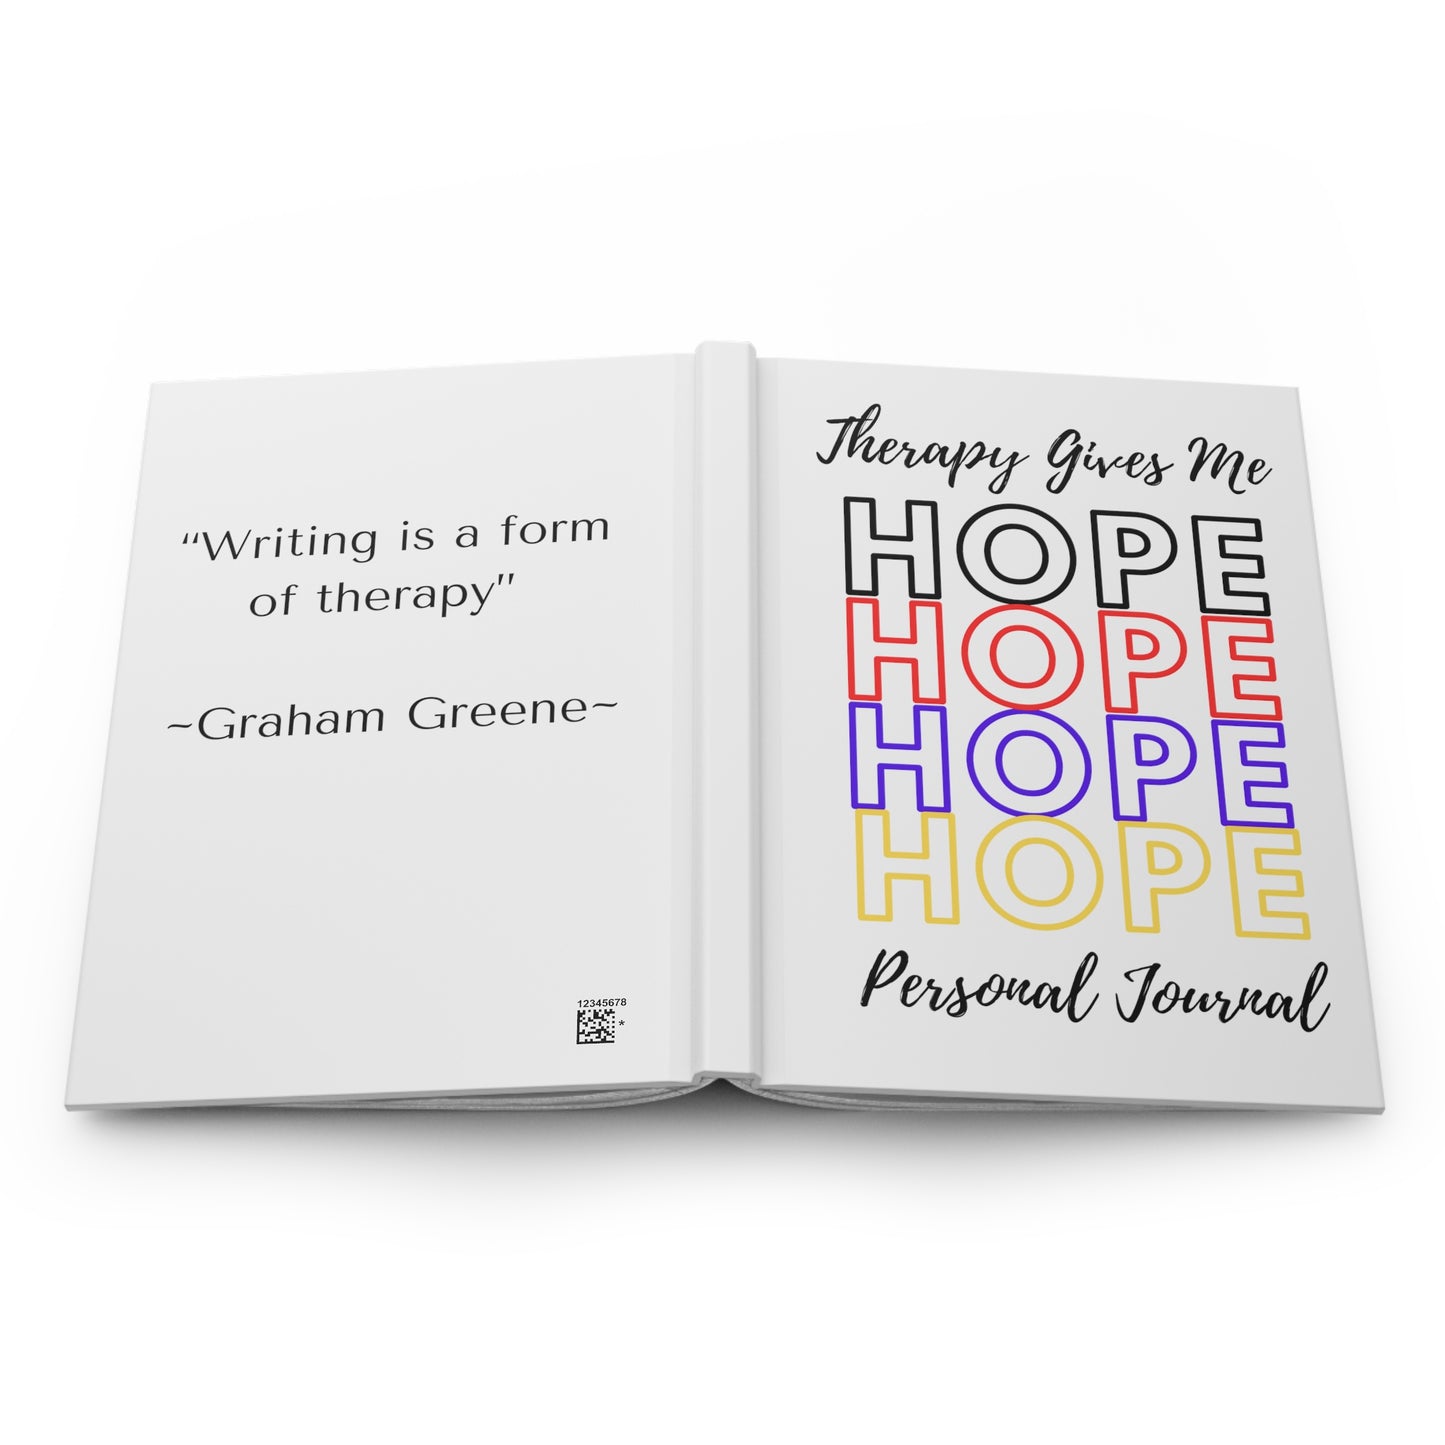 Therapy Gives Me Hope - Hardcover Journal Matte